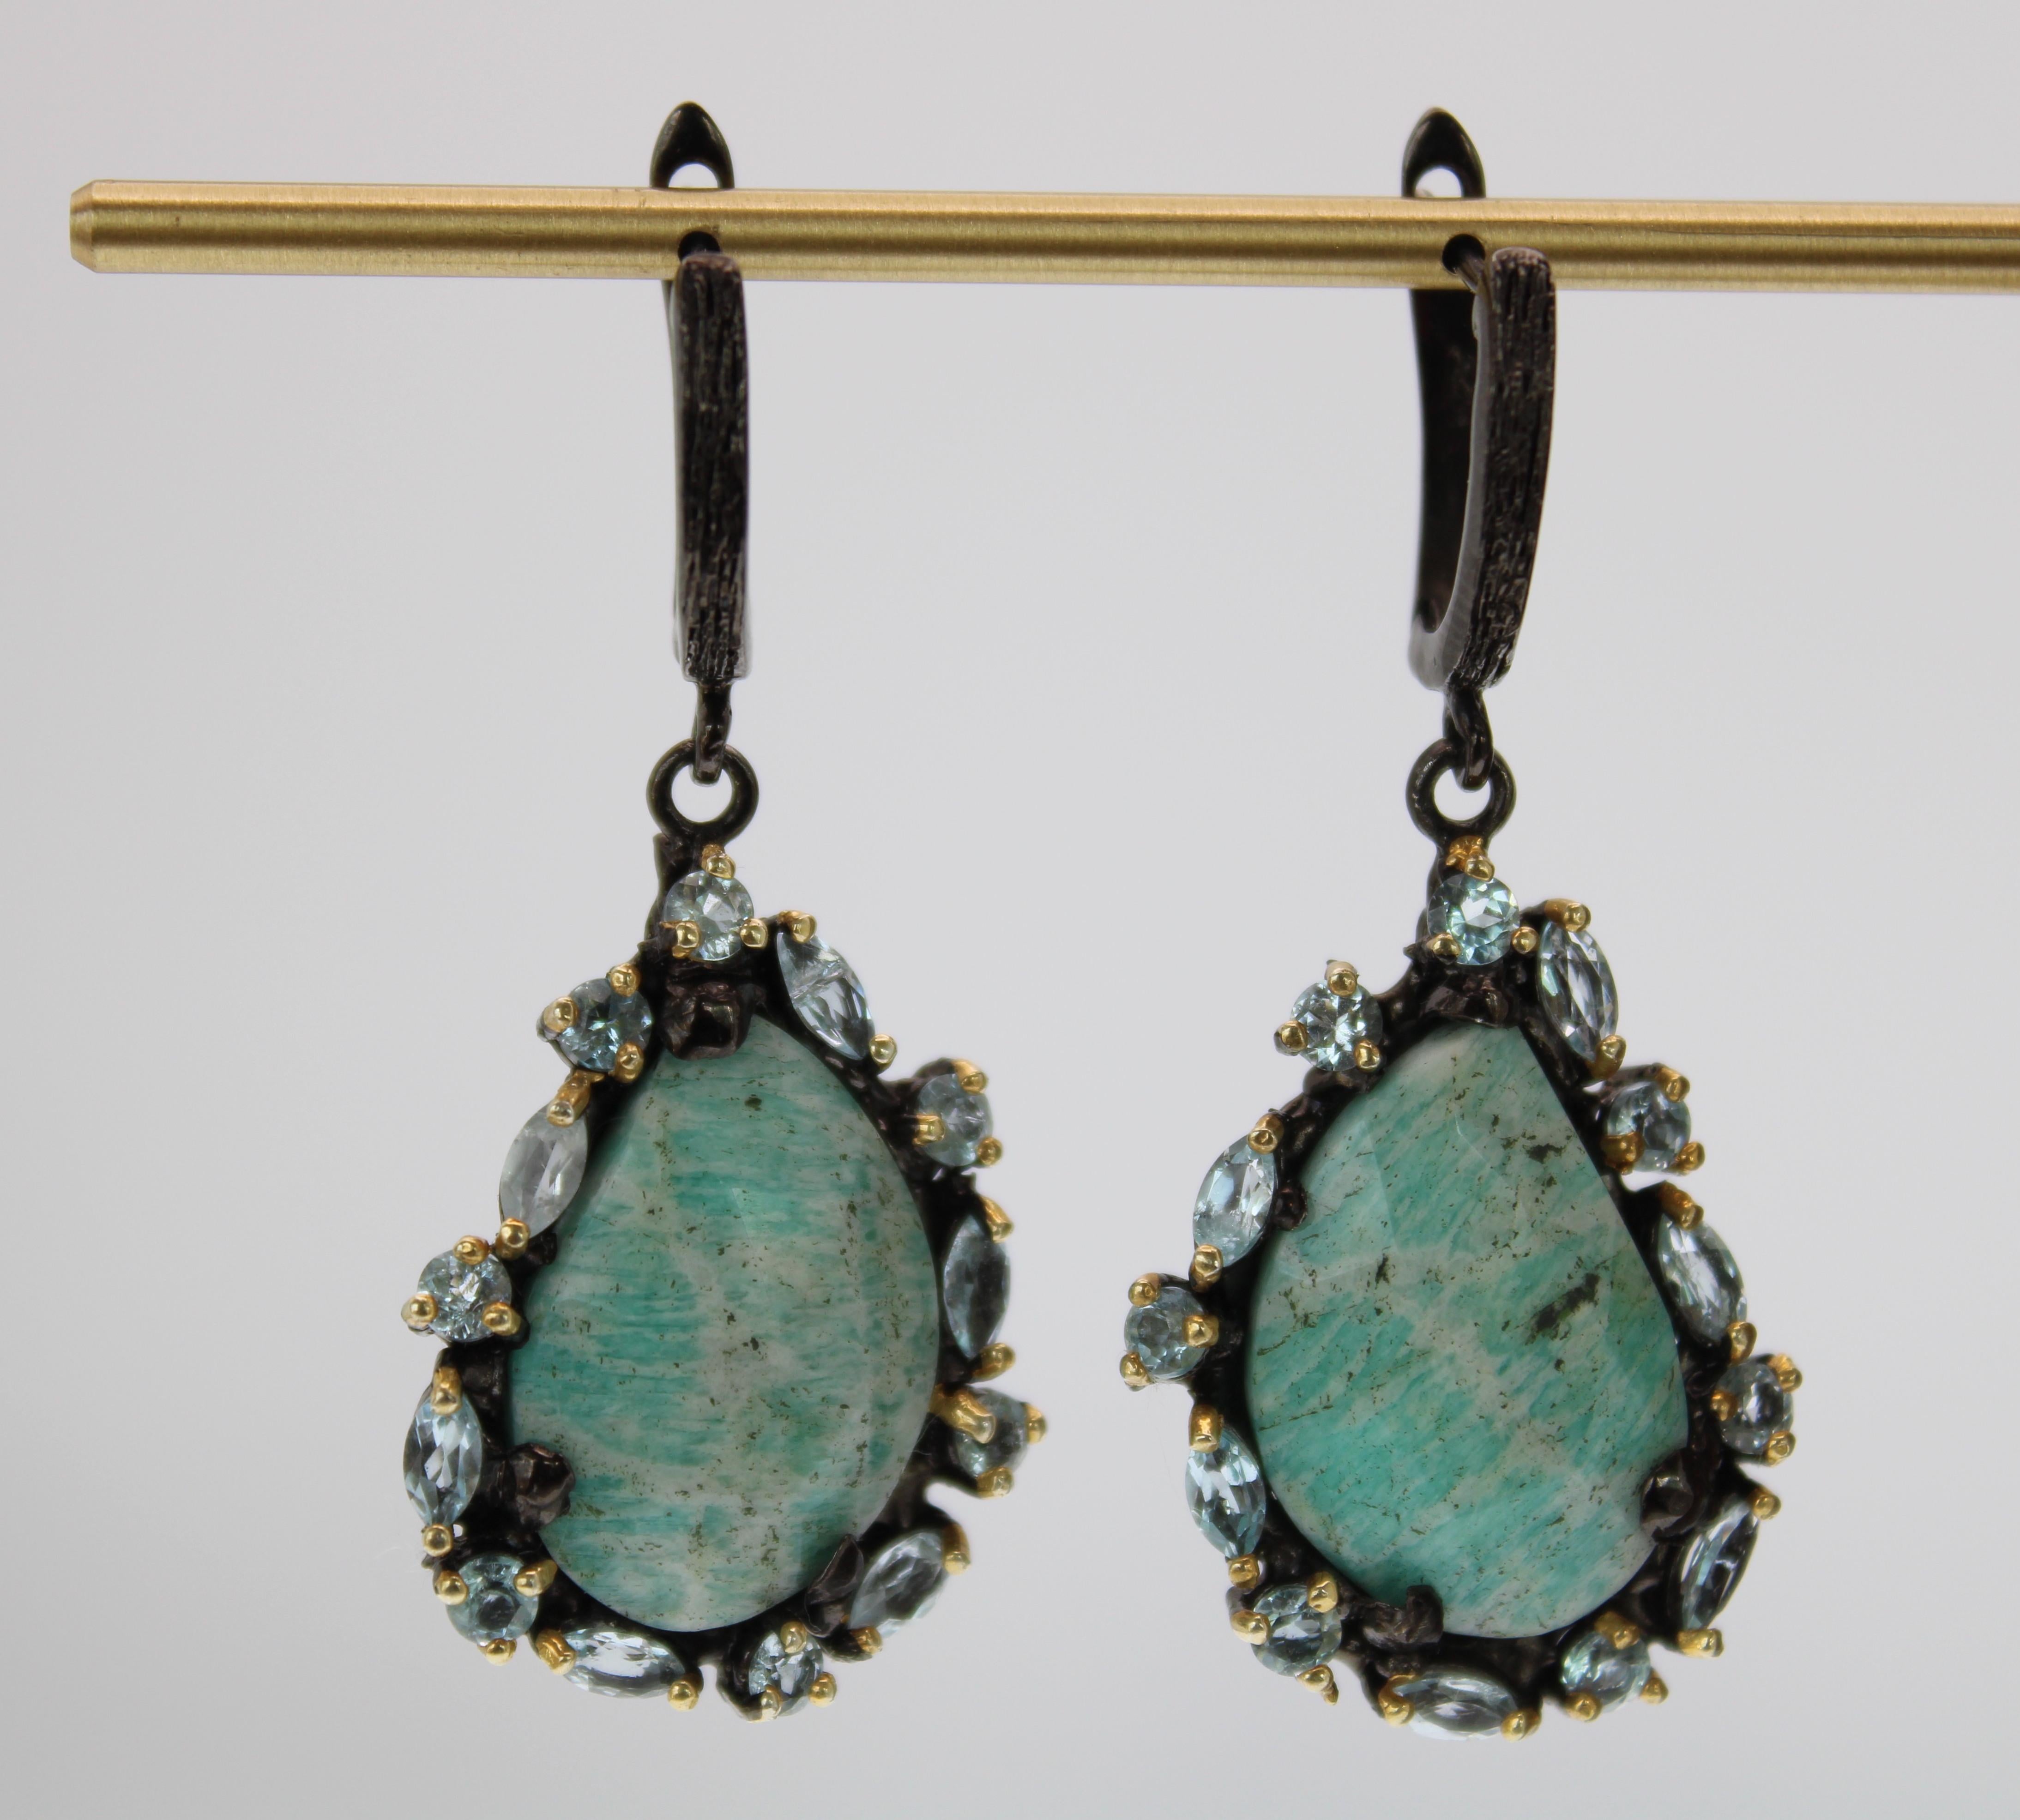 Beautiful pear shaped turquoise natural agate with aquamarine marquise stones and topaz round stones. This earrings are one of a kind and sparkle as the light reflects off the stones with each movement. They are plated in rhodium and 14K gold over